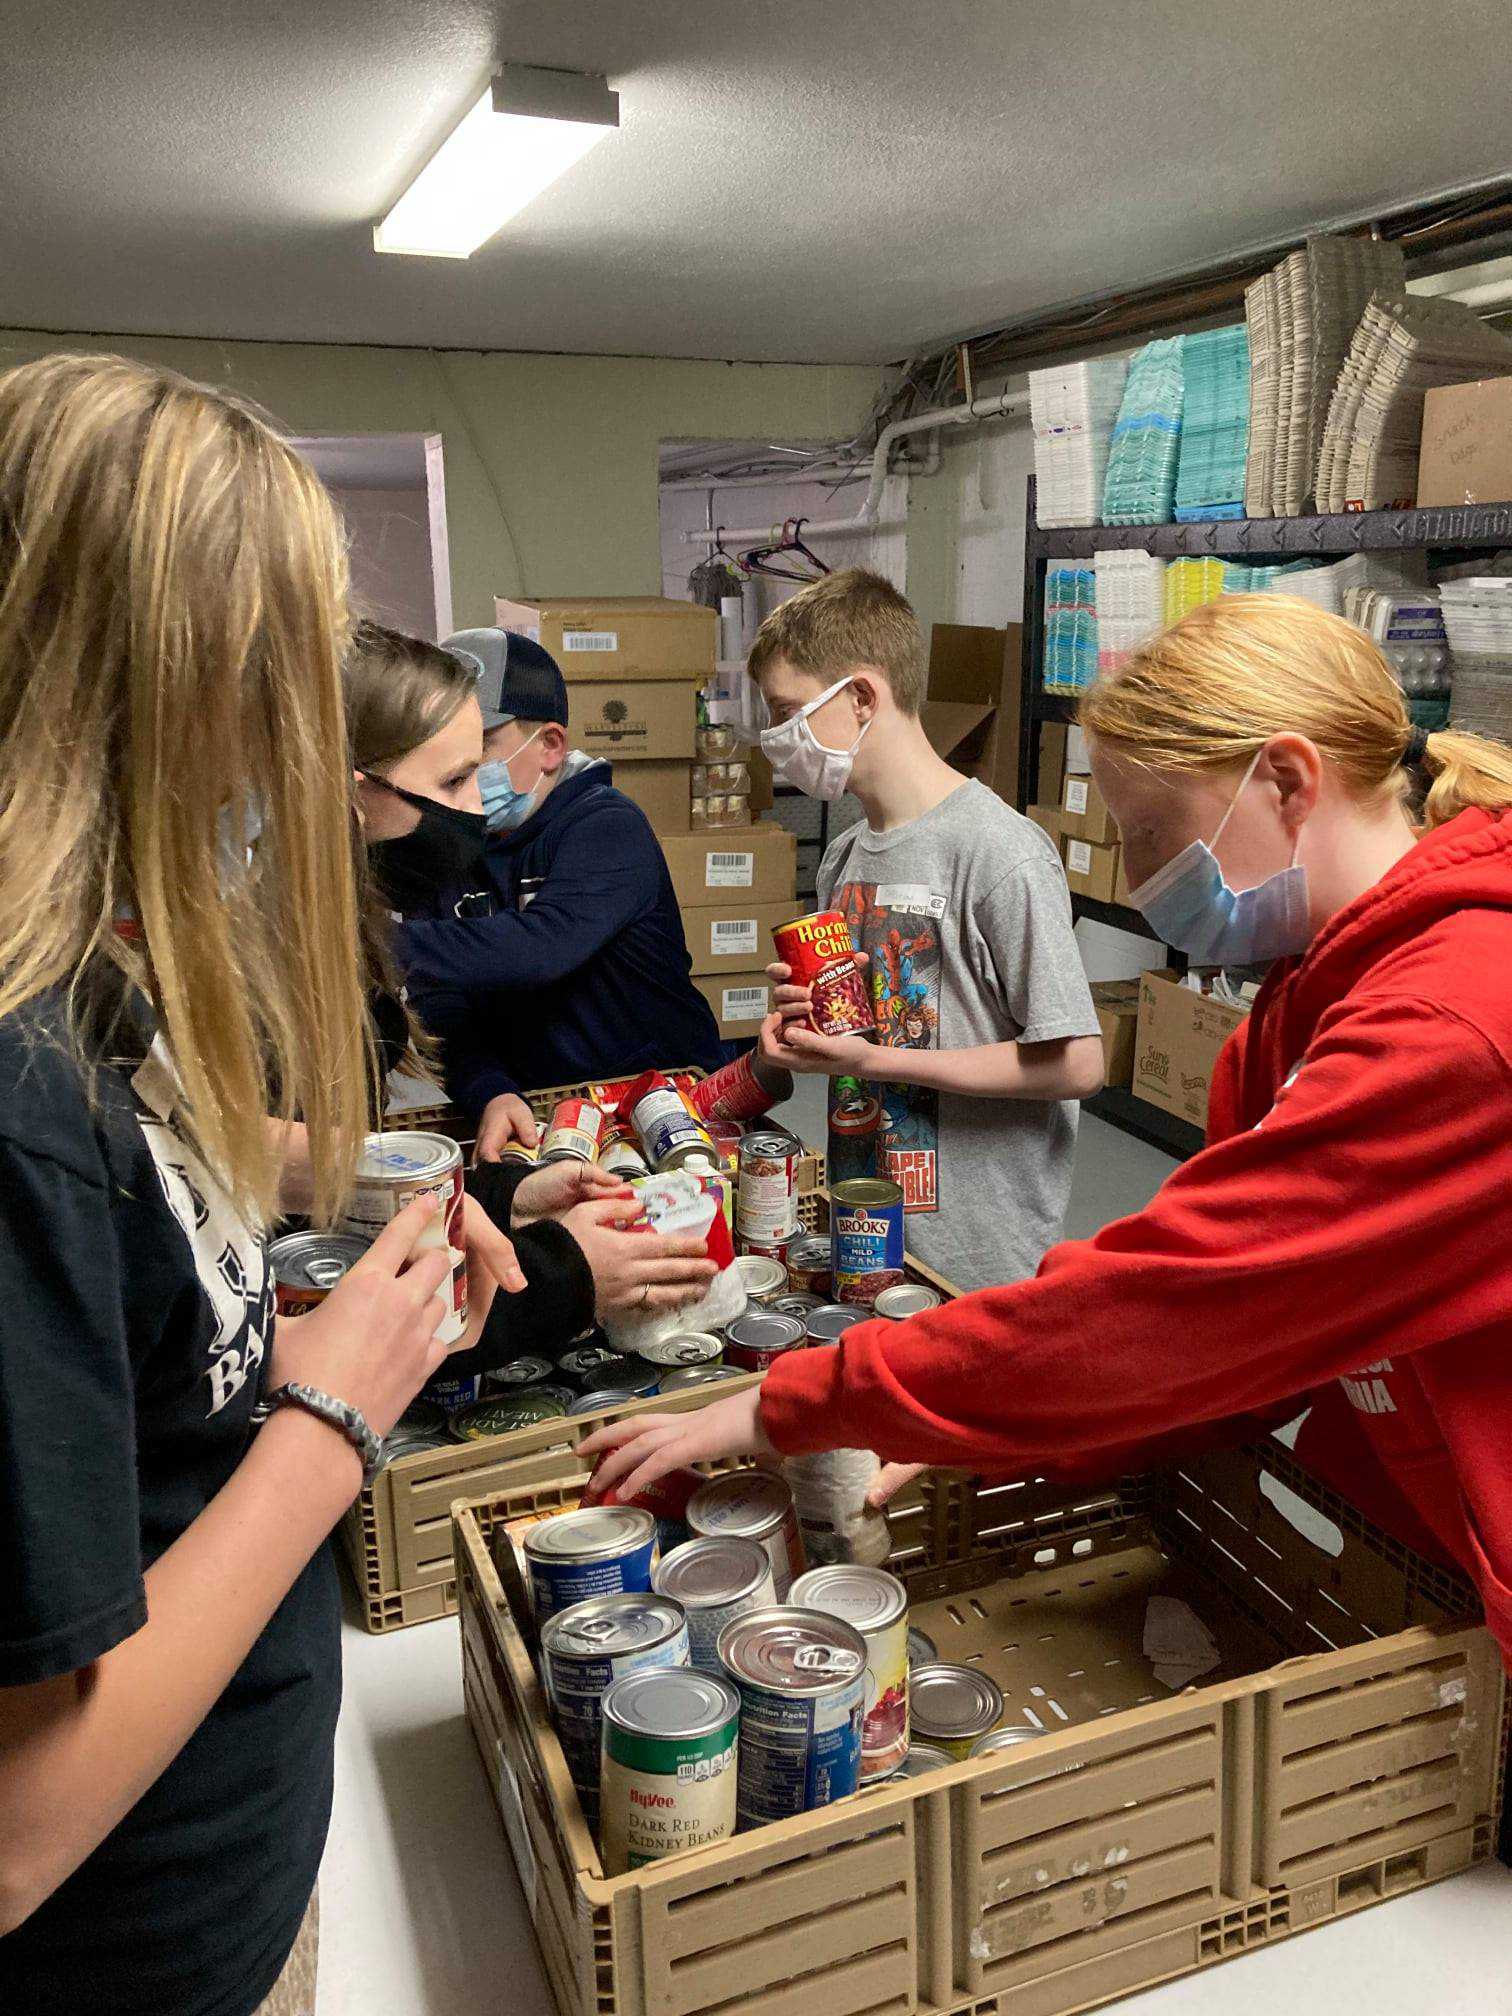 Cass County 4-H'ers, seen here helping at the Shepherd’s Staff Food Pantry in Harrisonville, Mo., raised the equivalent of more than 53,000 meals during the 2021 4-H Feeding Missouri food drive.